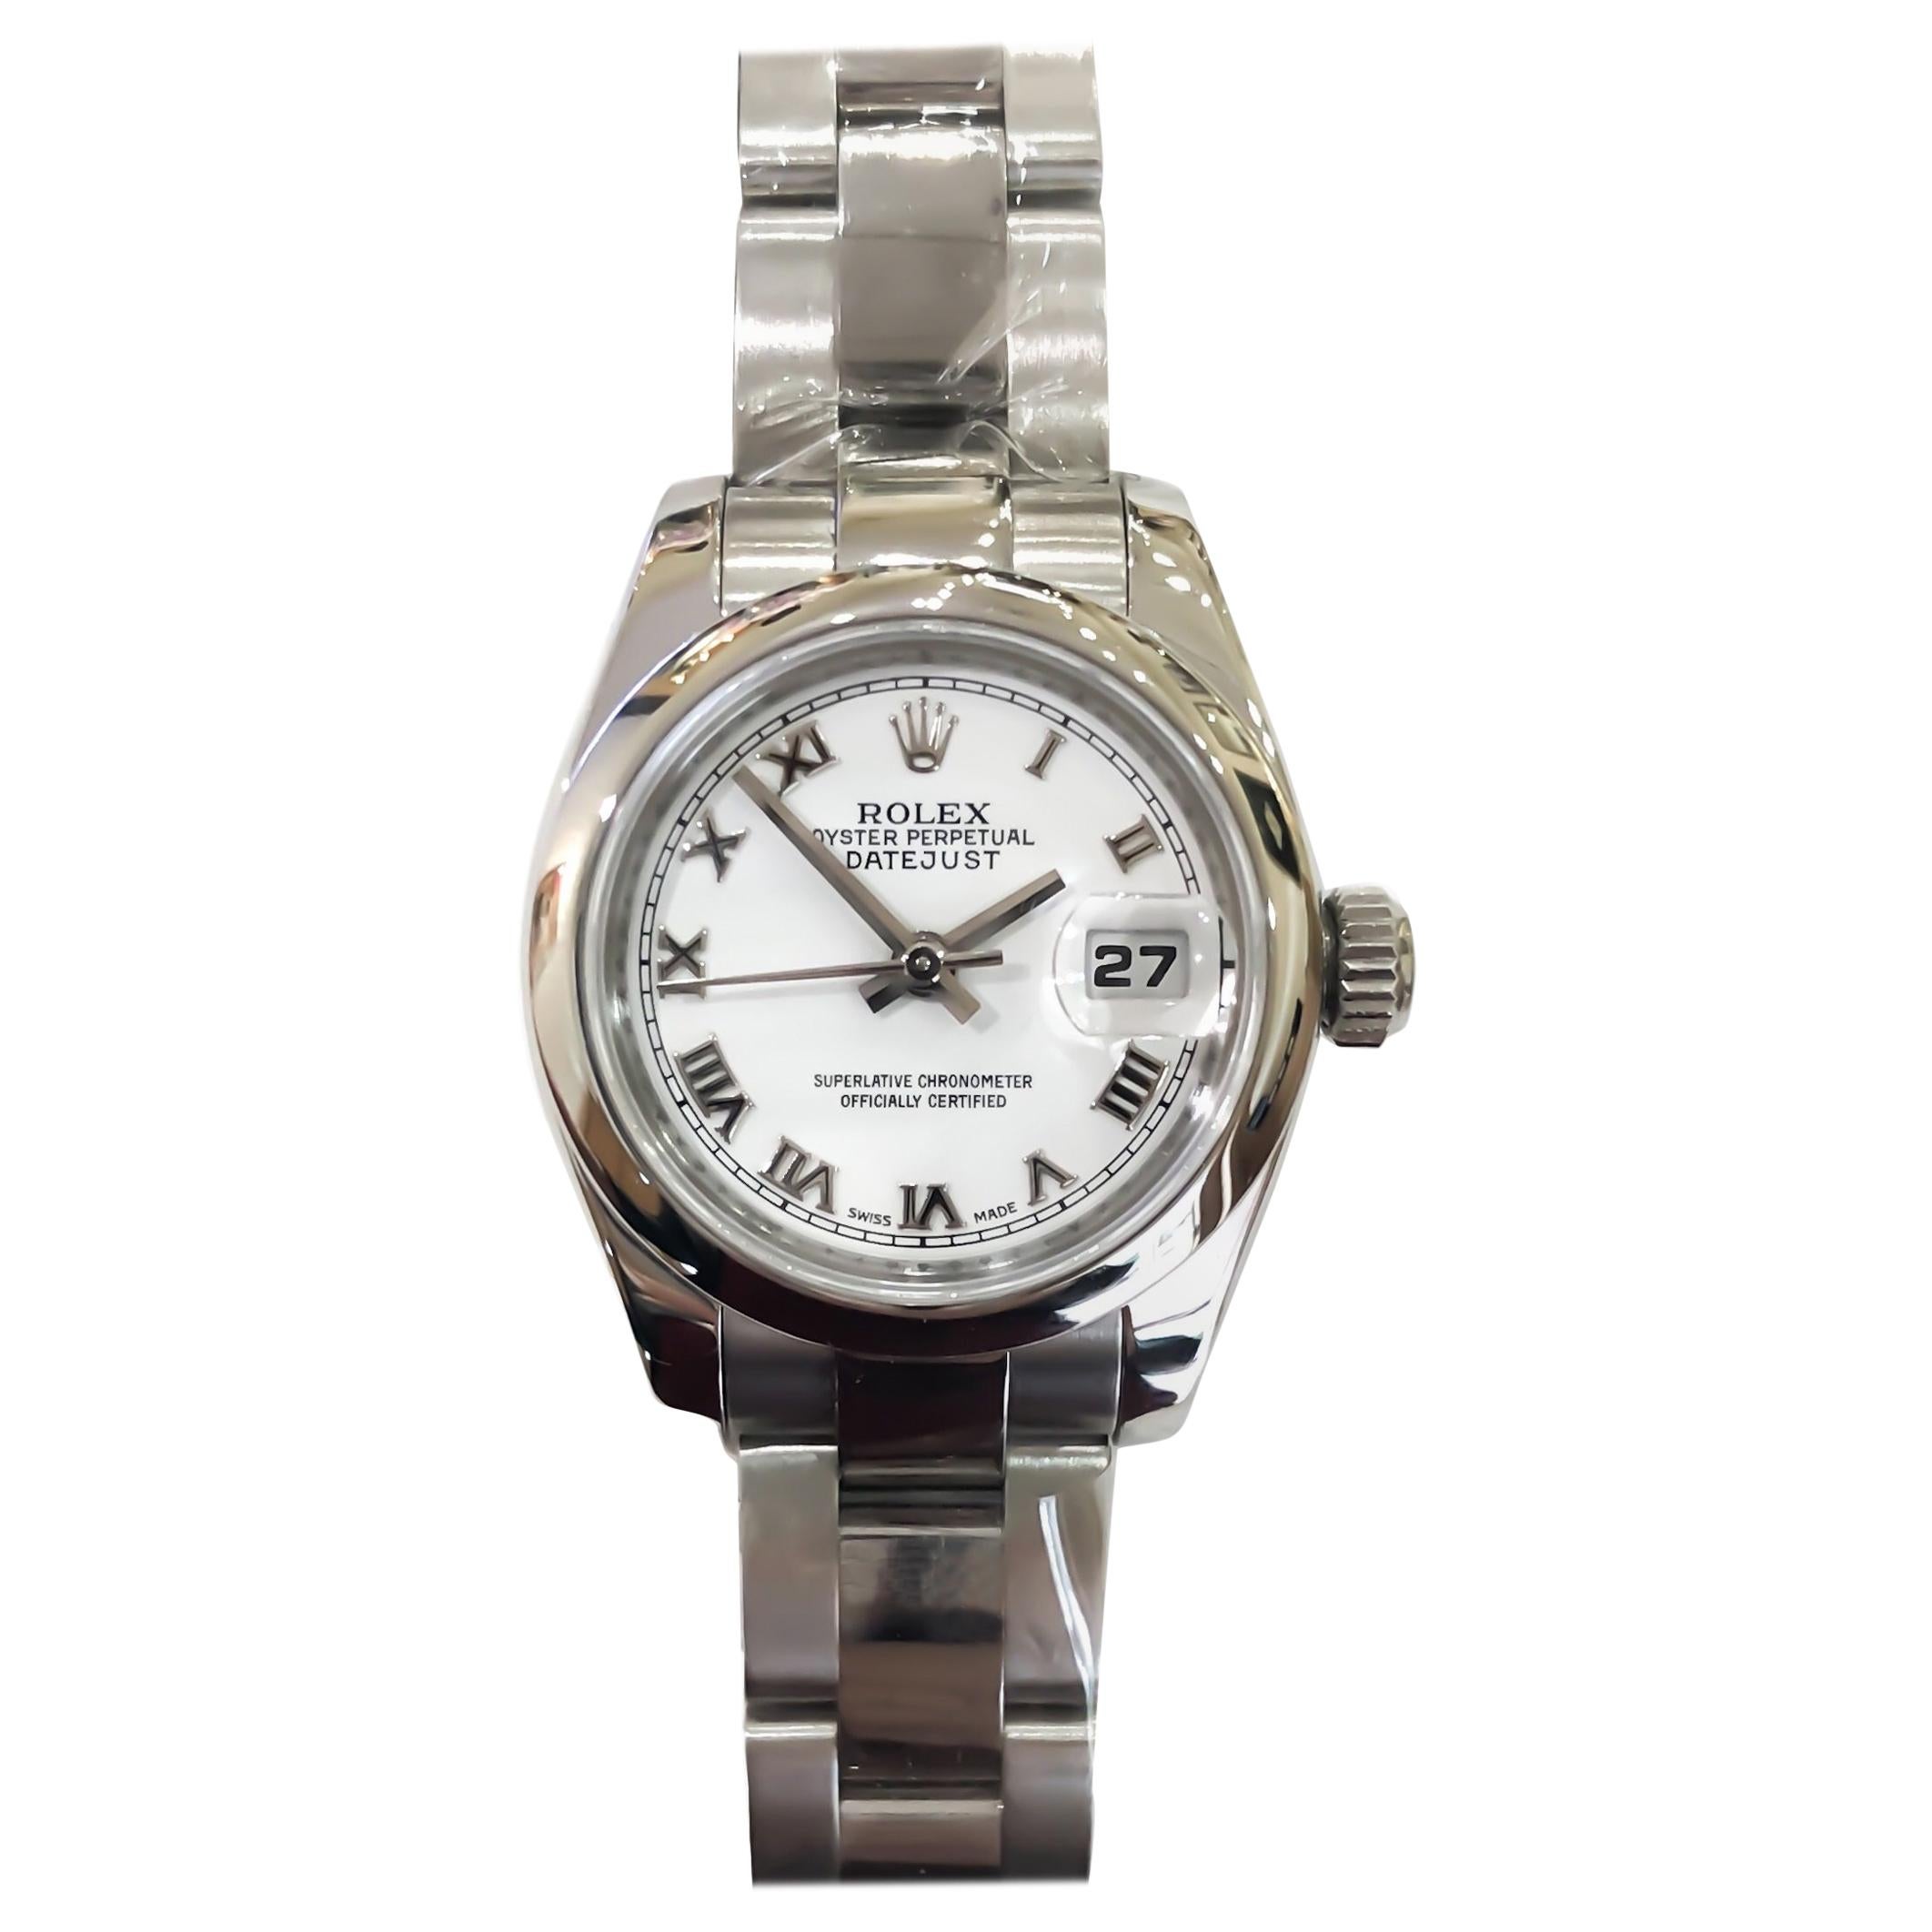 Rolex Woman's Datejust Stainless Steel White Dial Watch